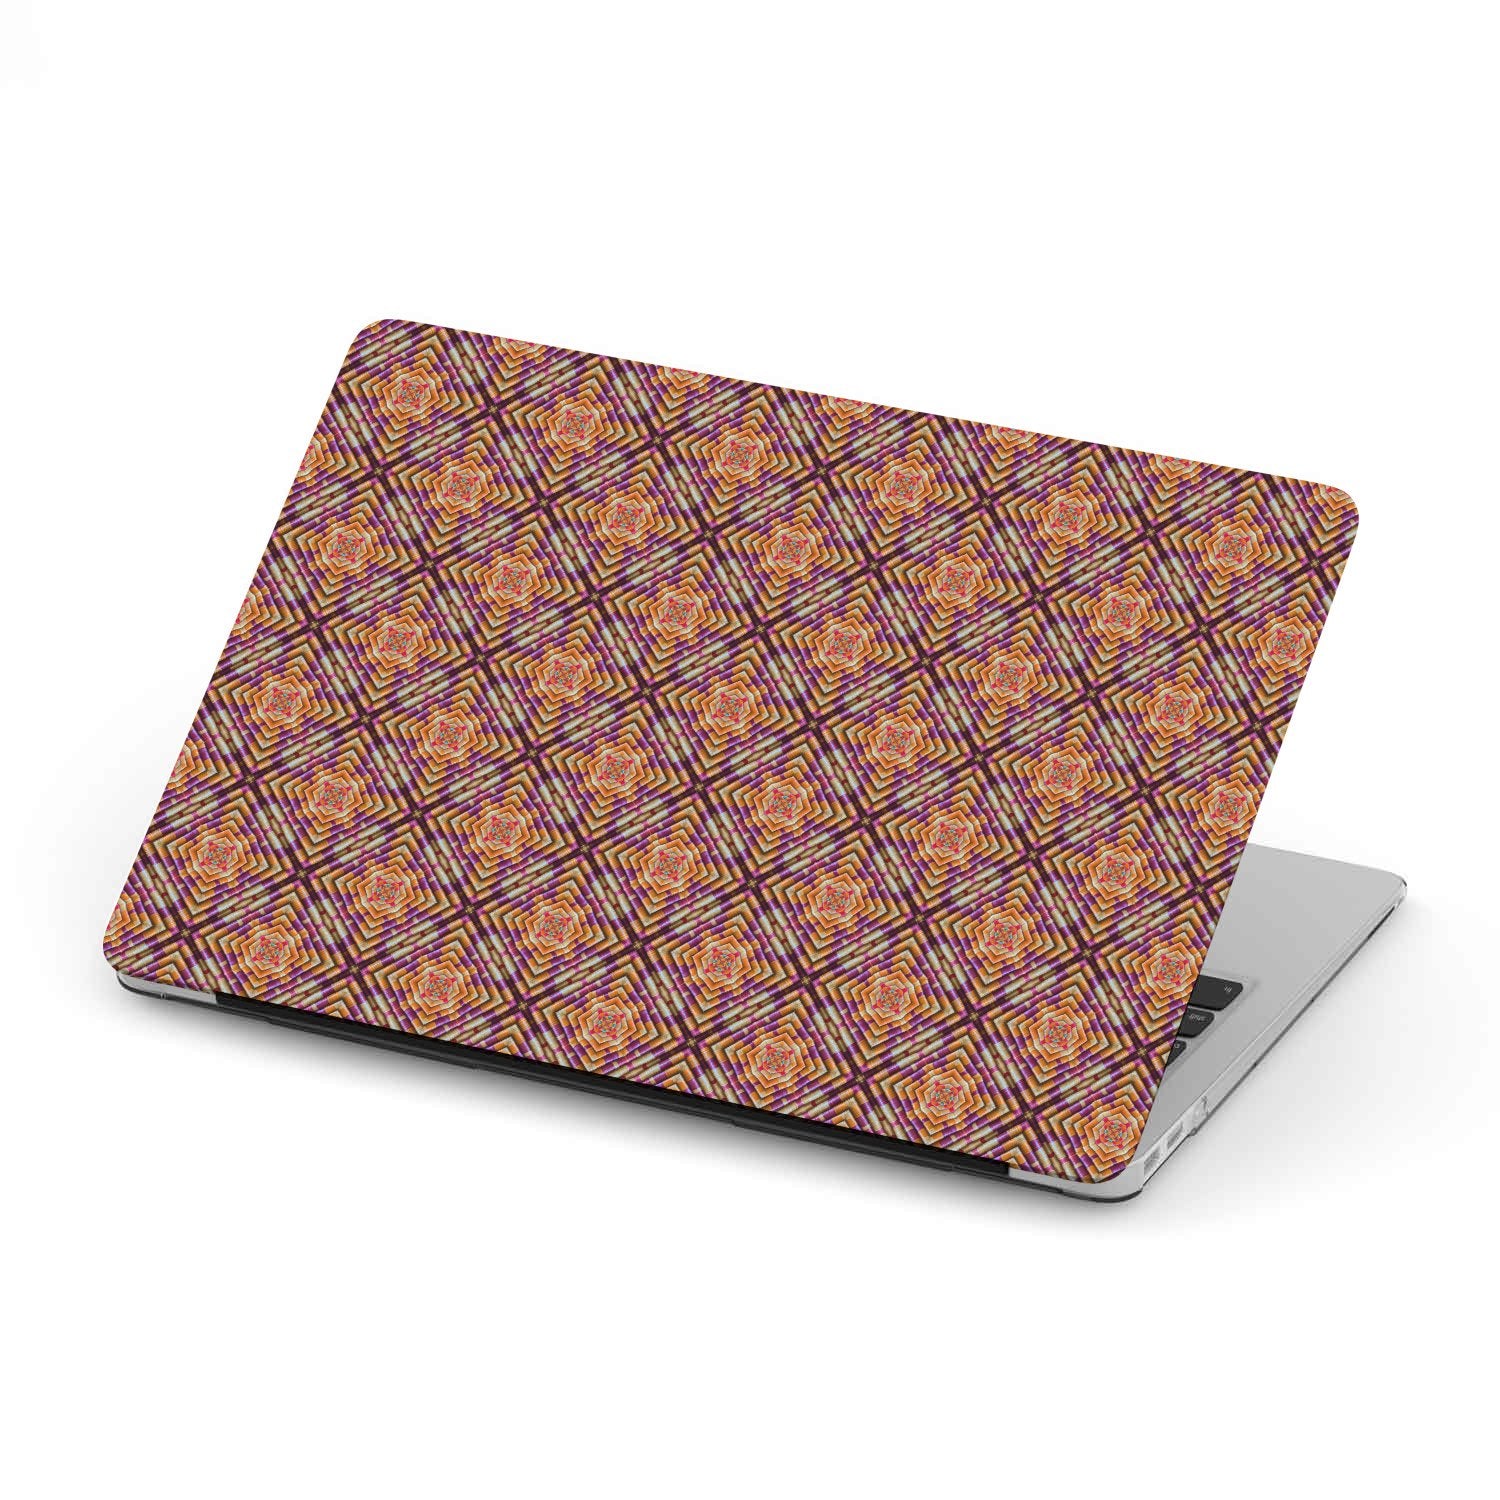 Traditional Indian Motif MacBook Cover